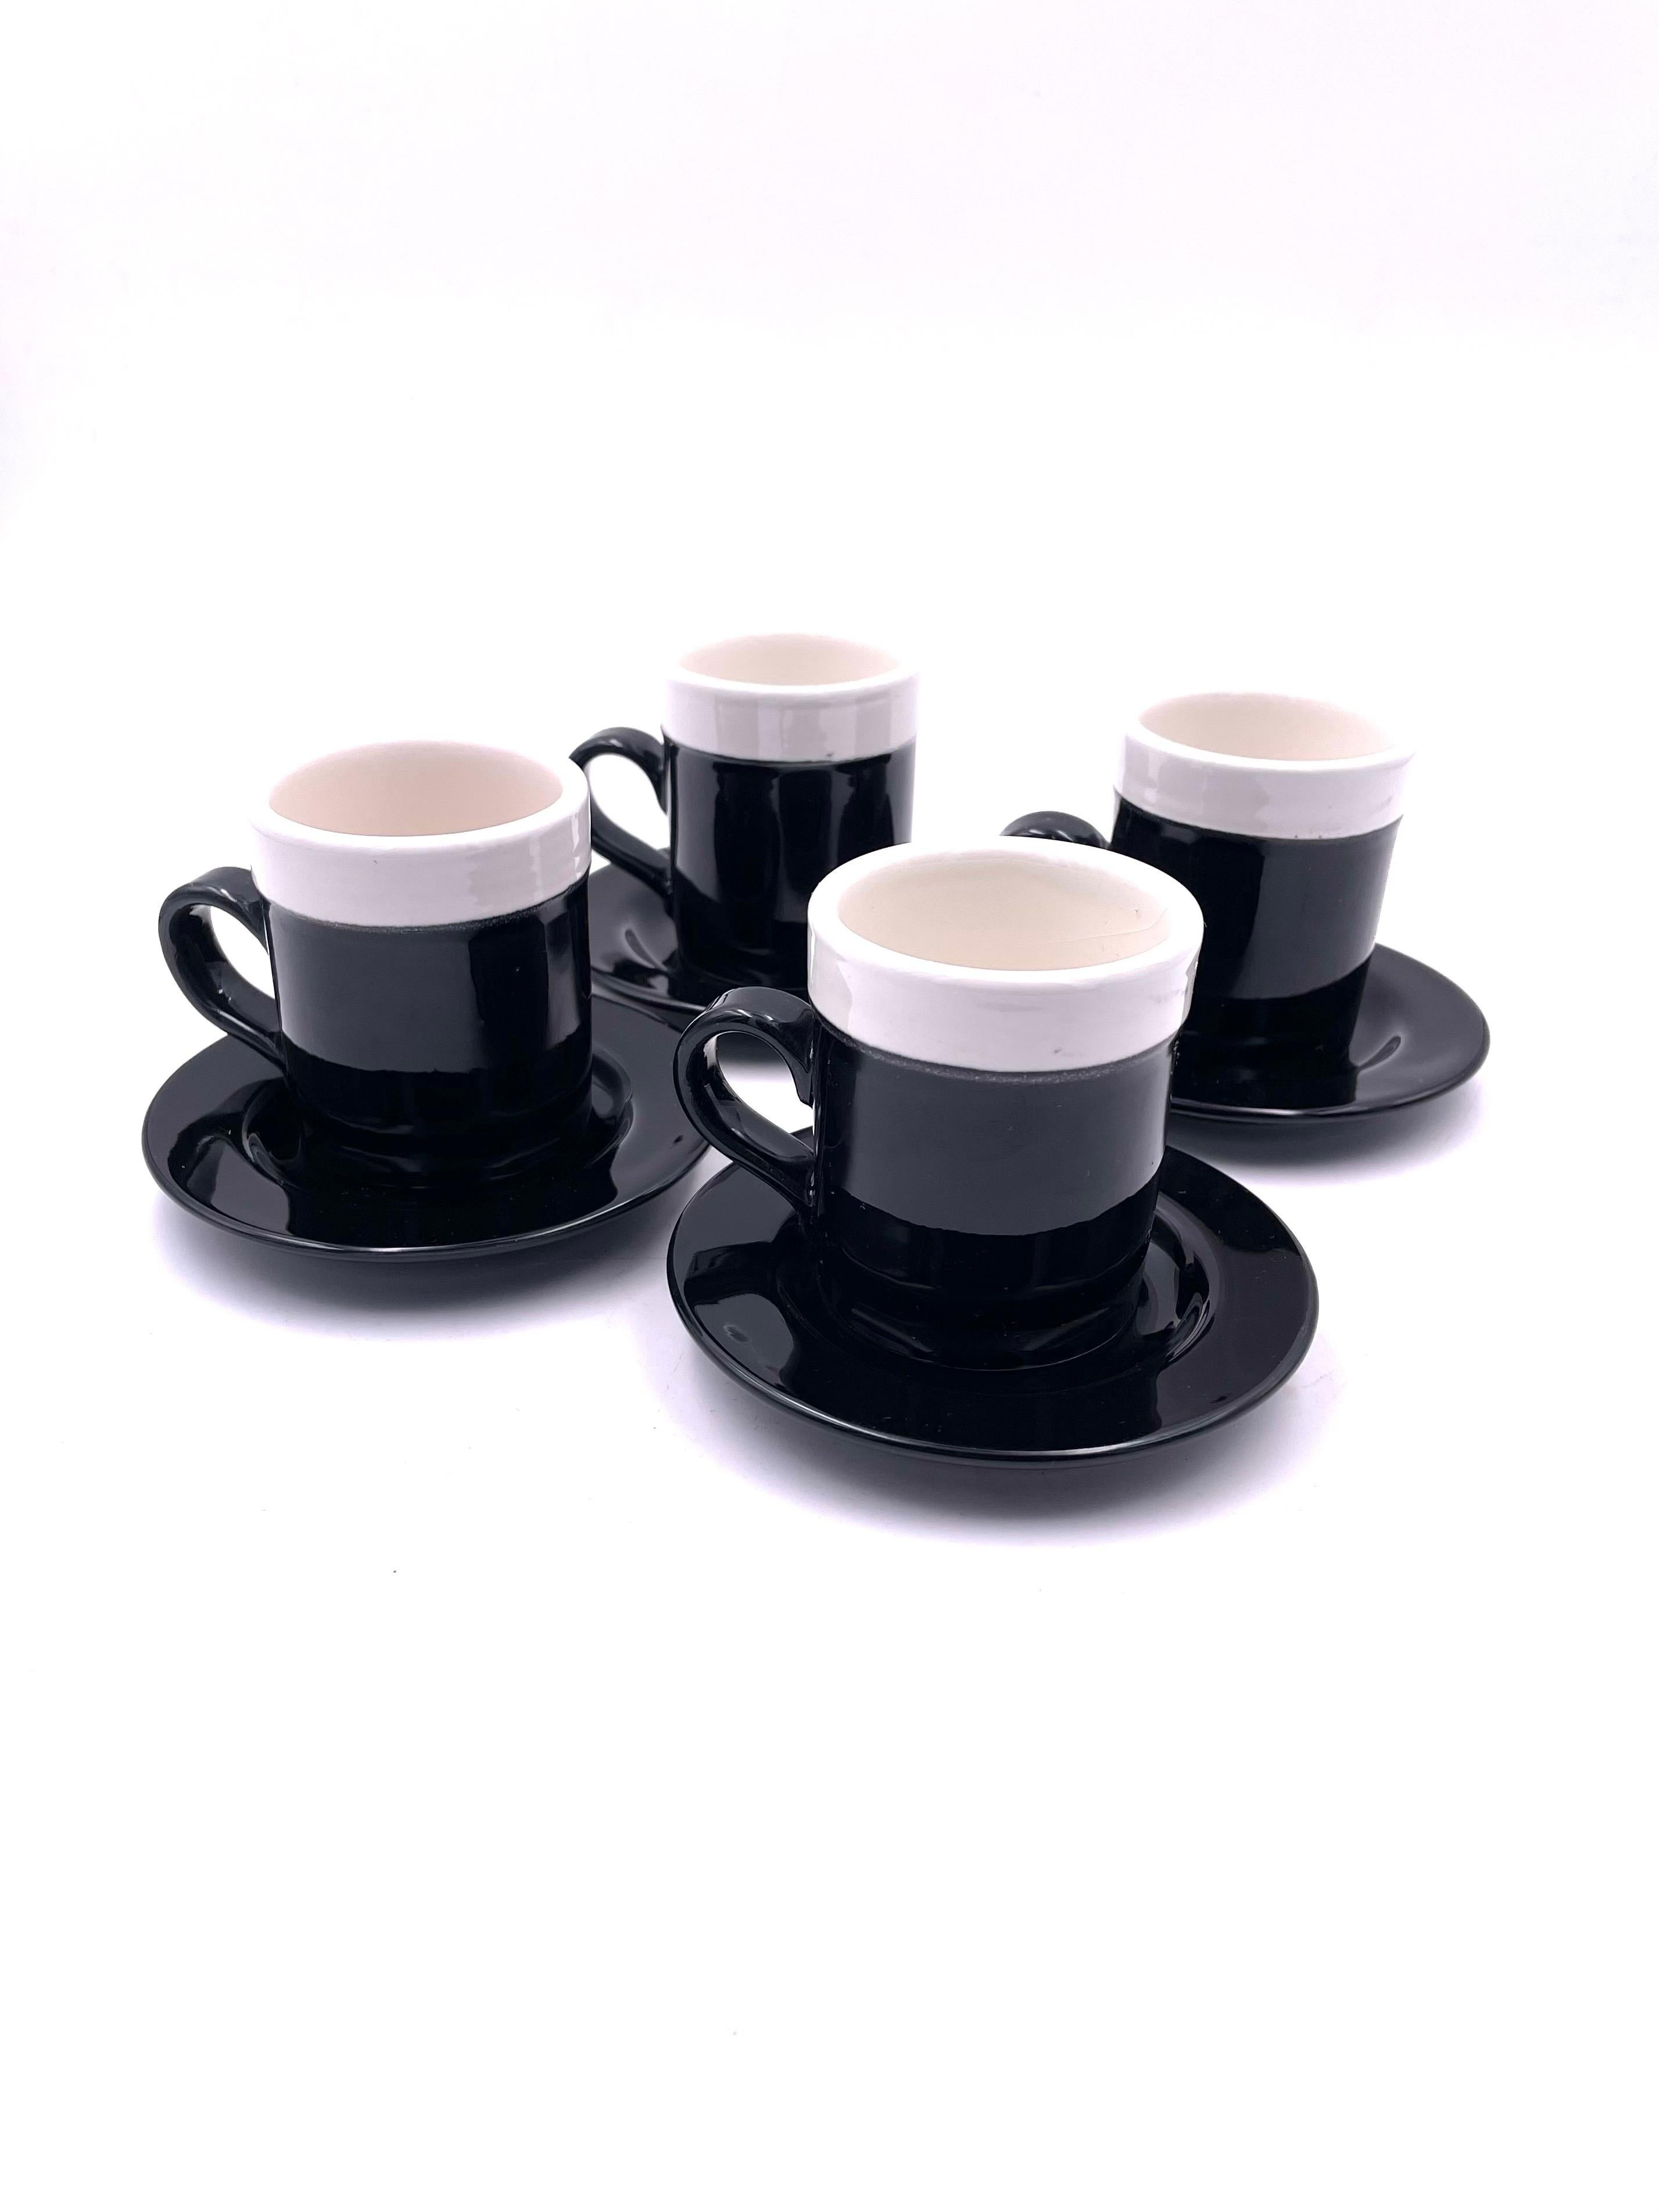 A very rare set of 4 espresso cups and saucers the plates are 4